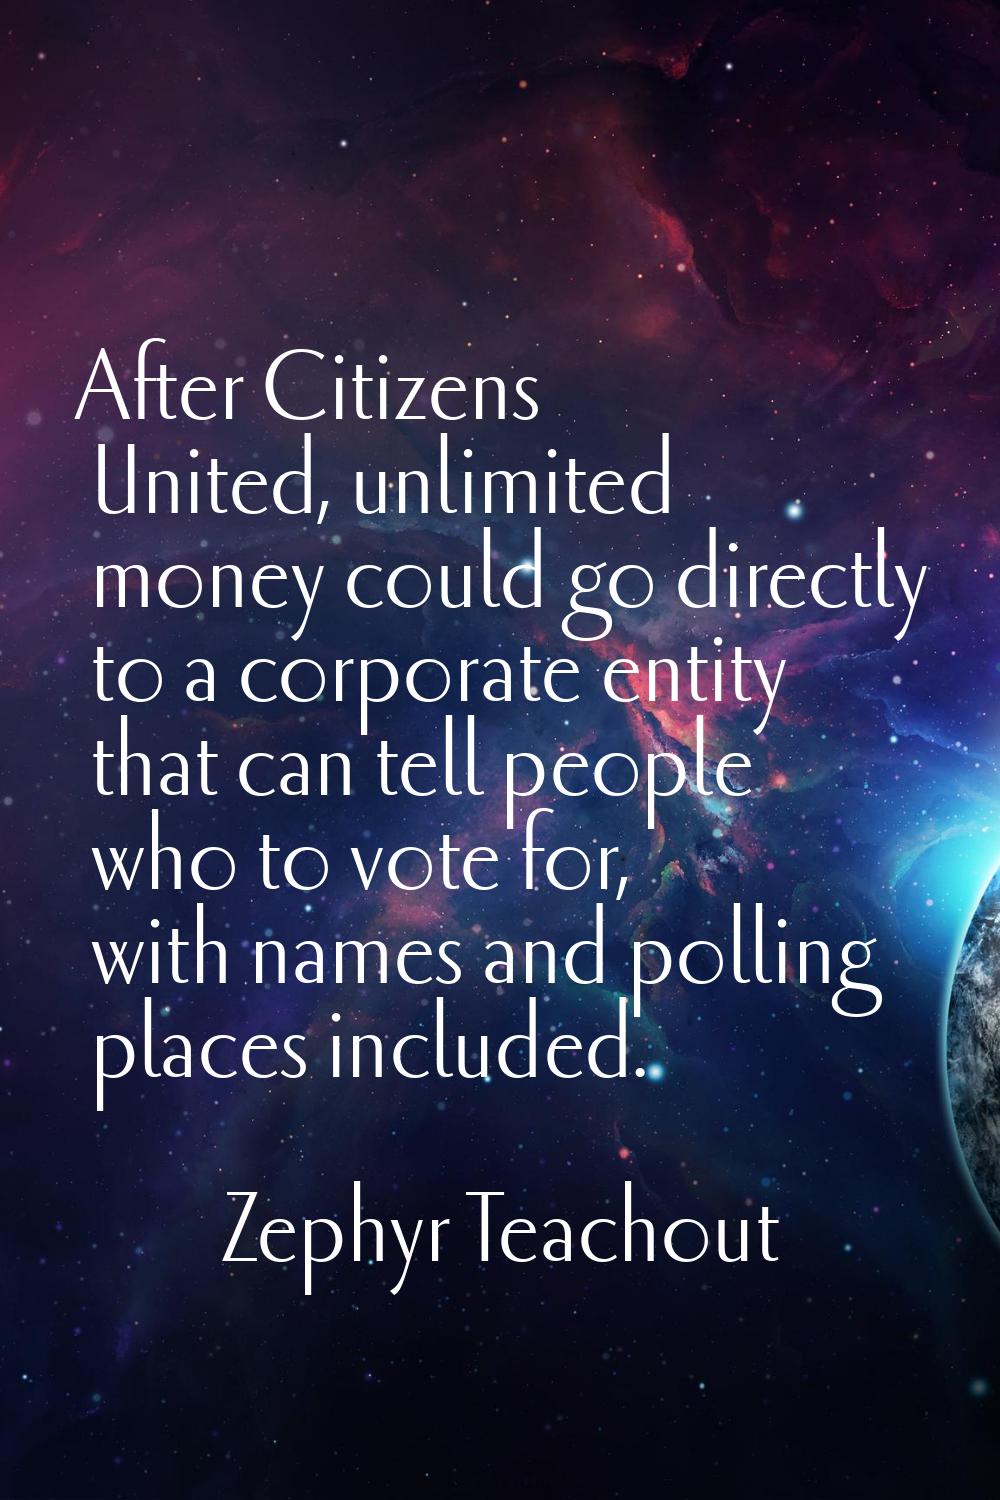 After Citizens United, unlimited money could go directly to a corporate entity that can tell people